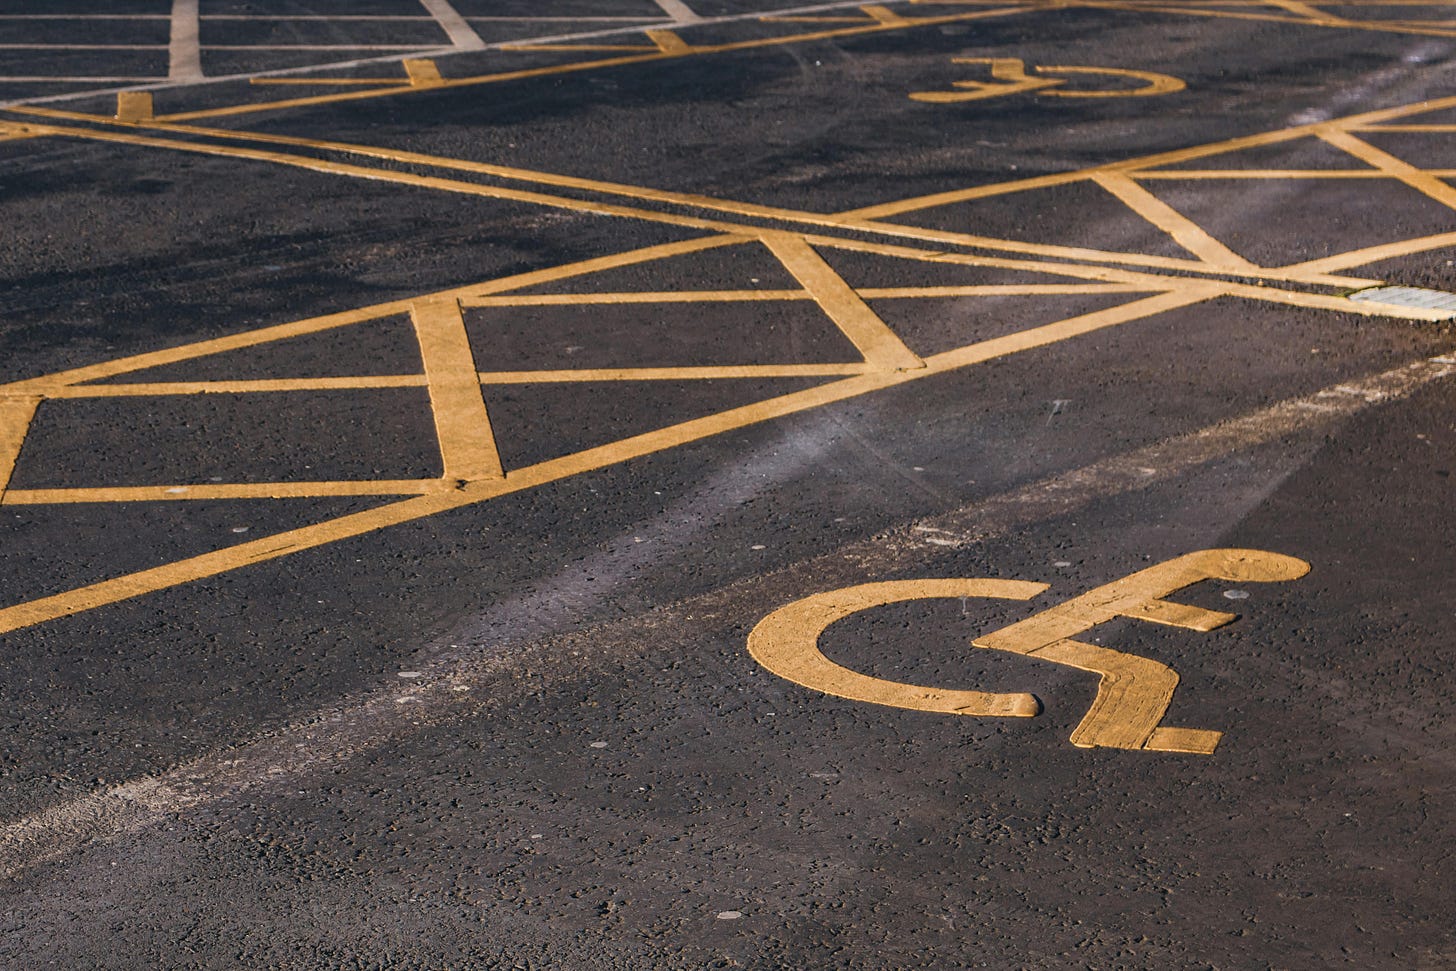 Accessible parking spaces